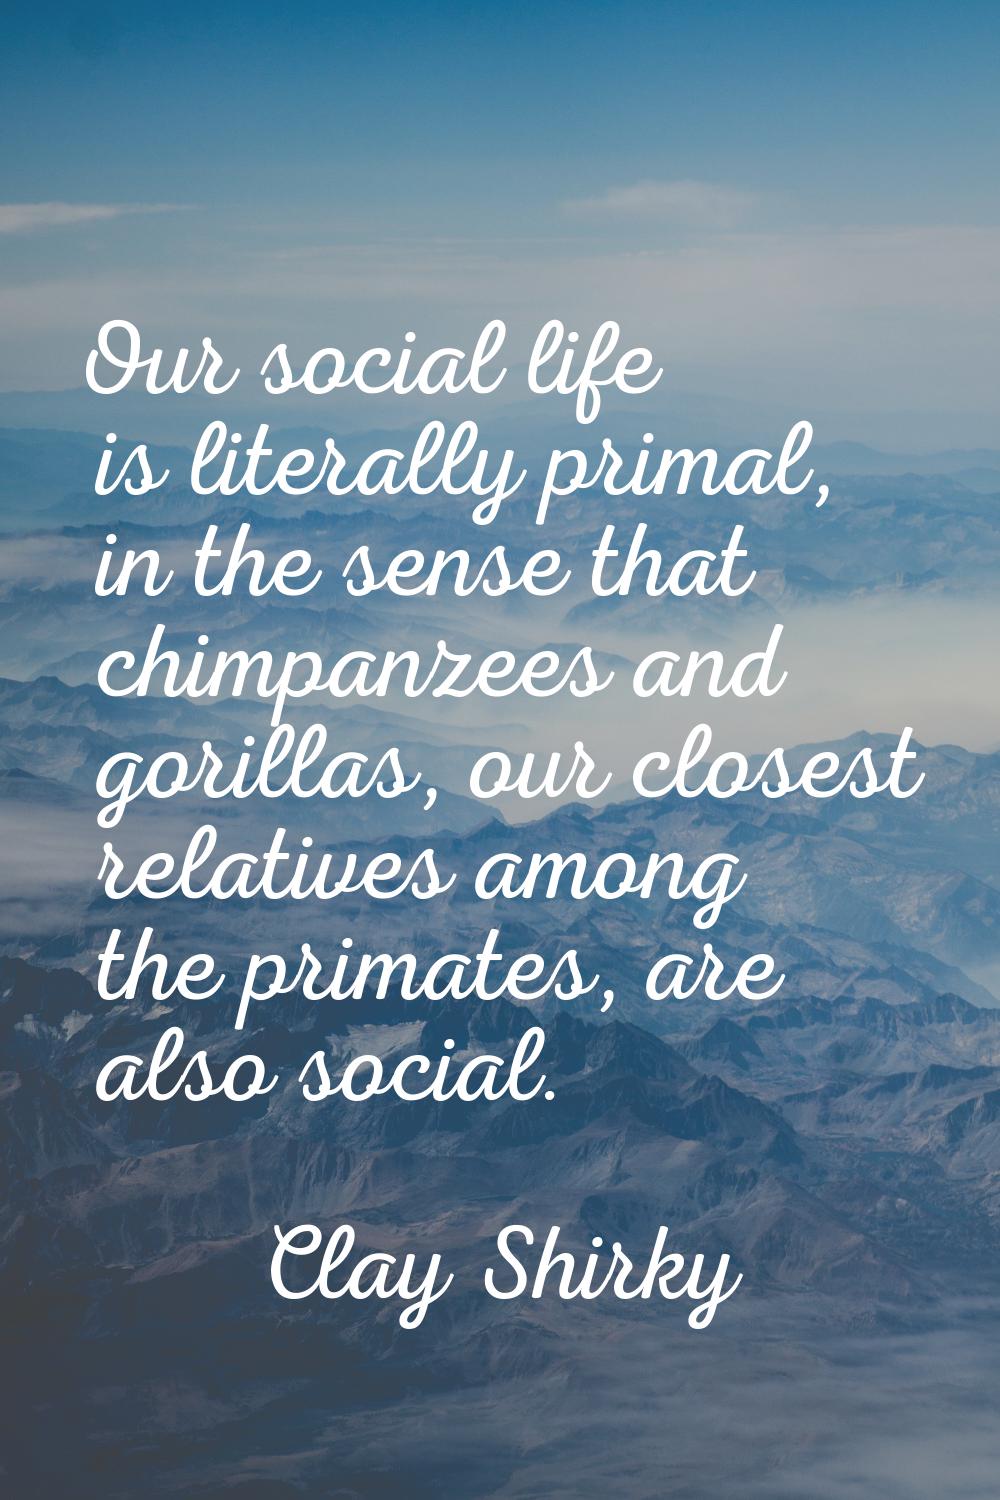 Our social life is literally primal, in the sense that chimpanzees and gorillas, our closest relati